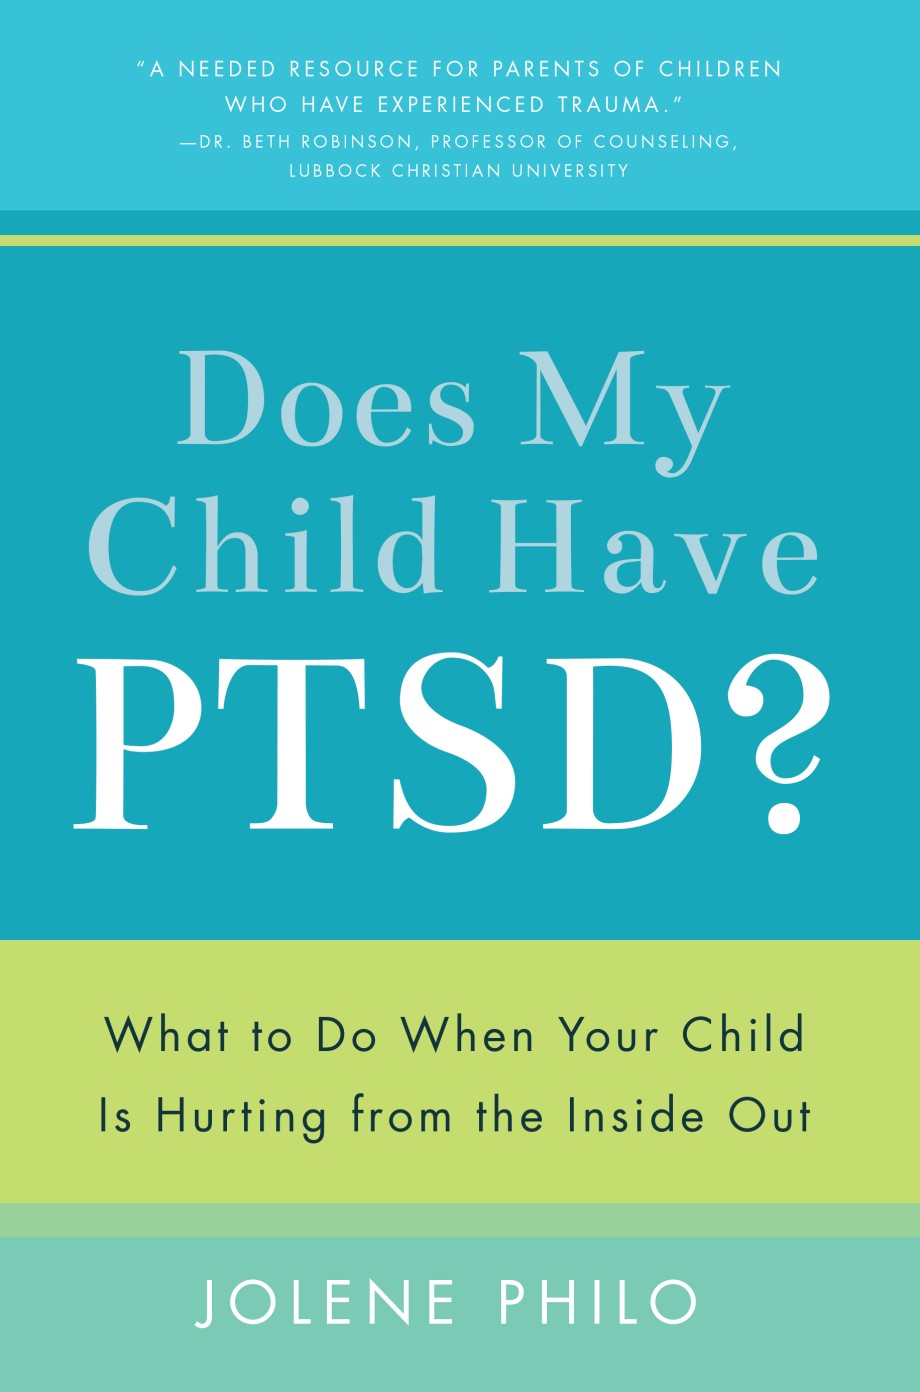 Does My Child Have PTSD? What to Do When Your Child Is Hurting from the Inside Out